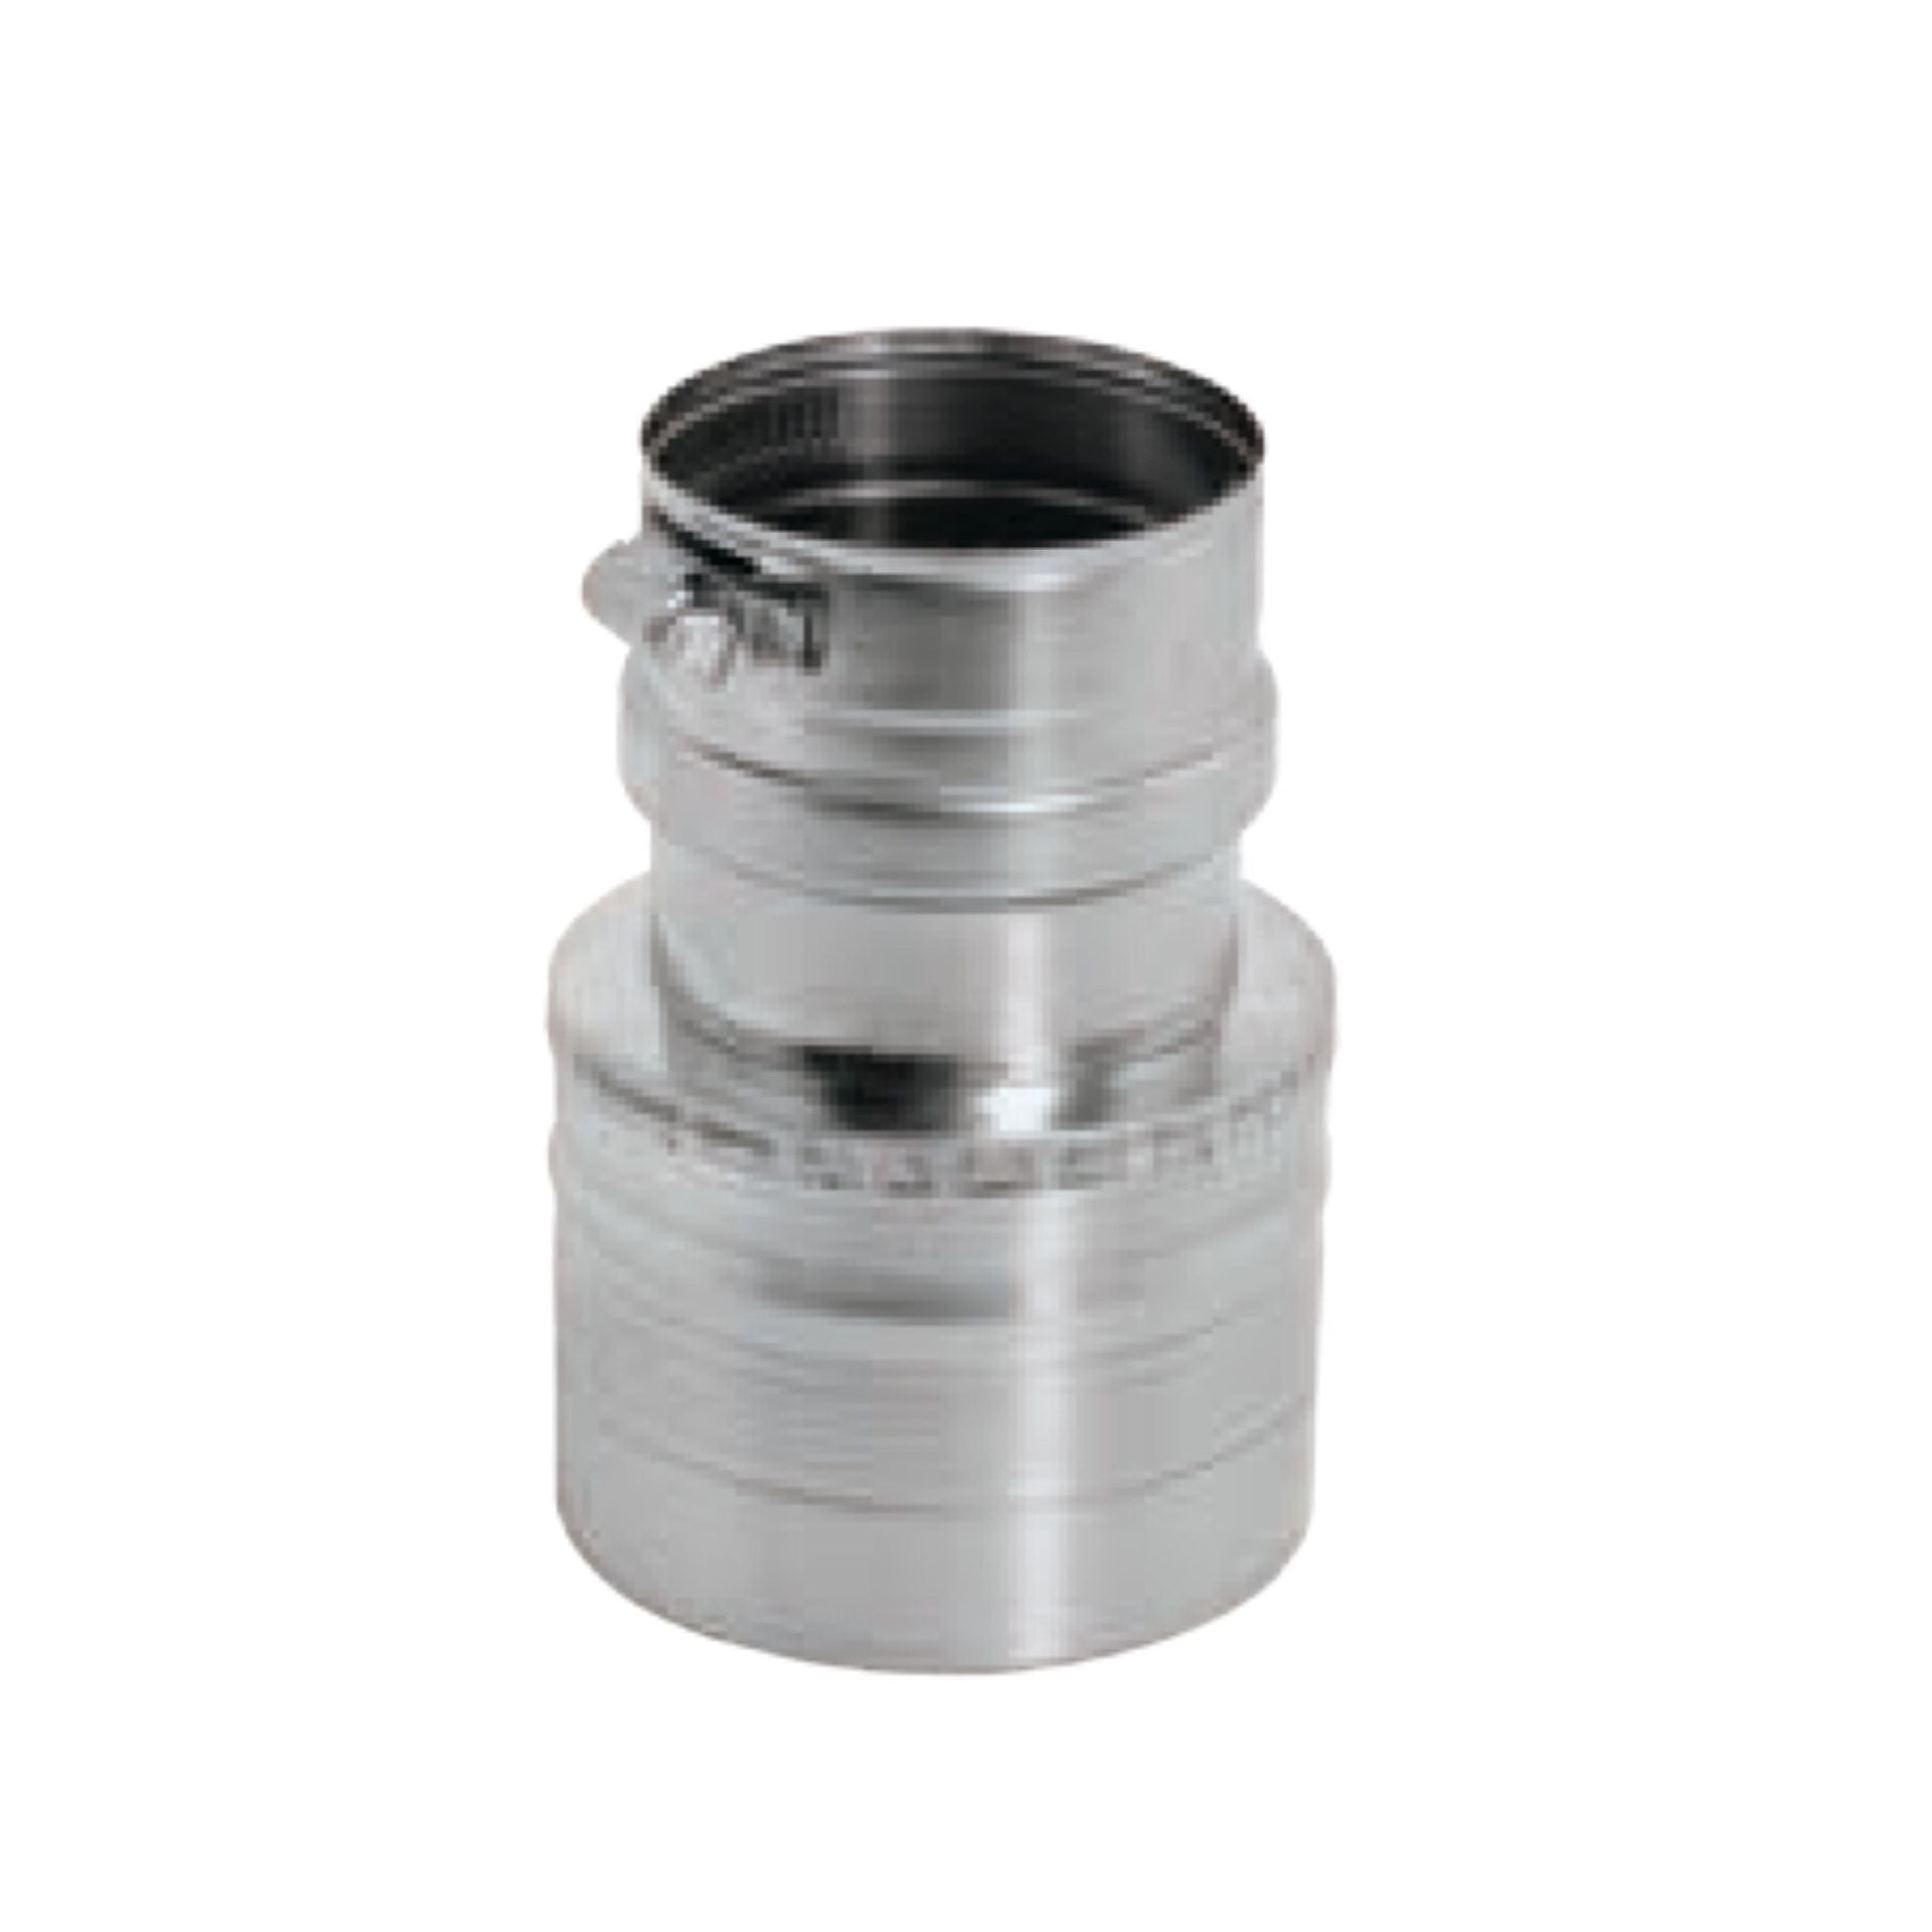 DuraVent FasNSeal 5" x 4" 316L Stainless Steel Stepped Reducer